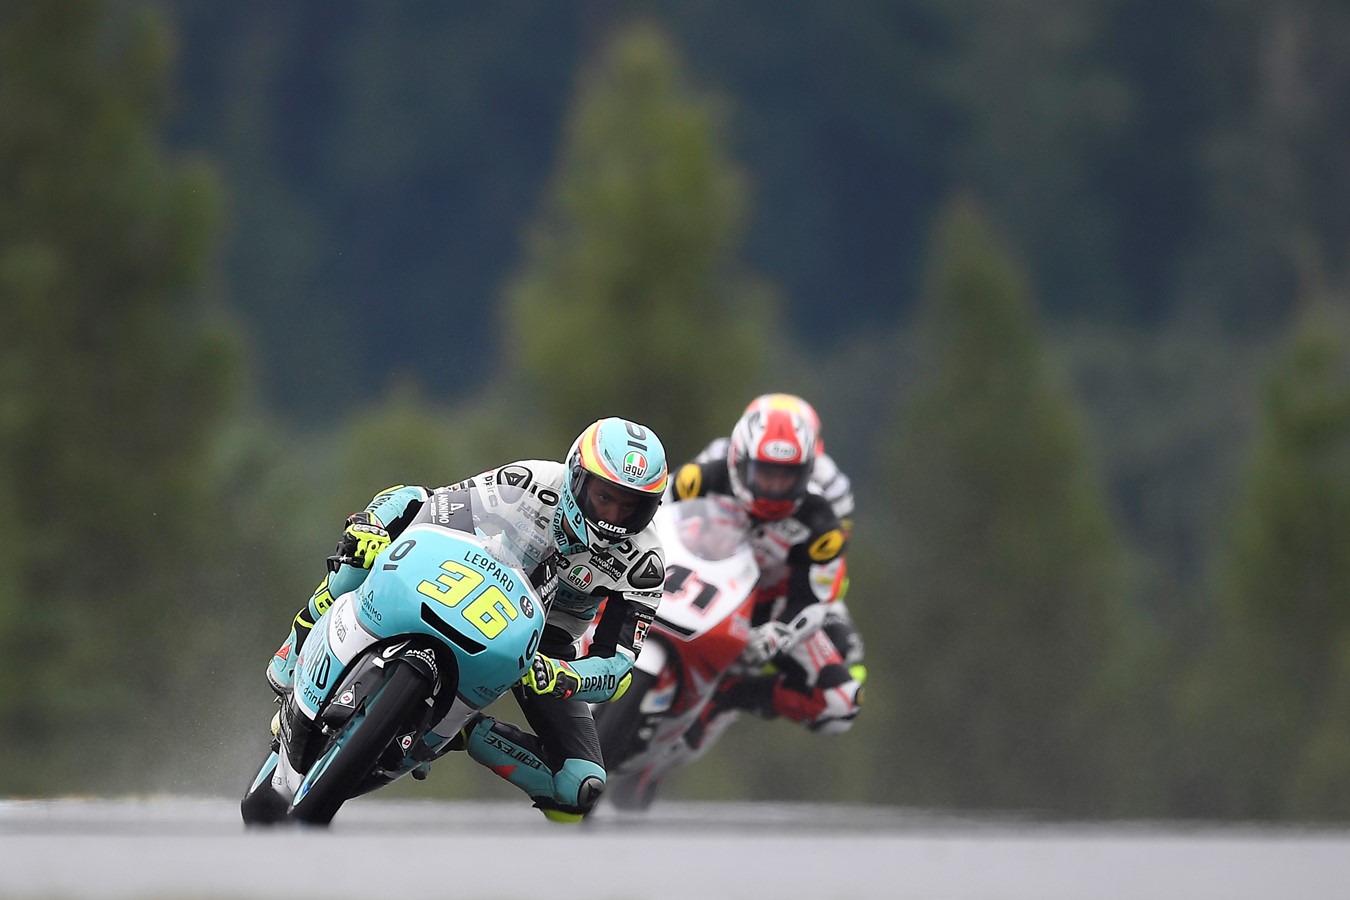 Joan Mir claims sixth win of the year and increases championship lead